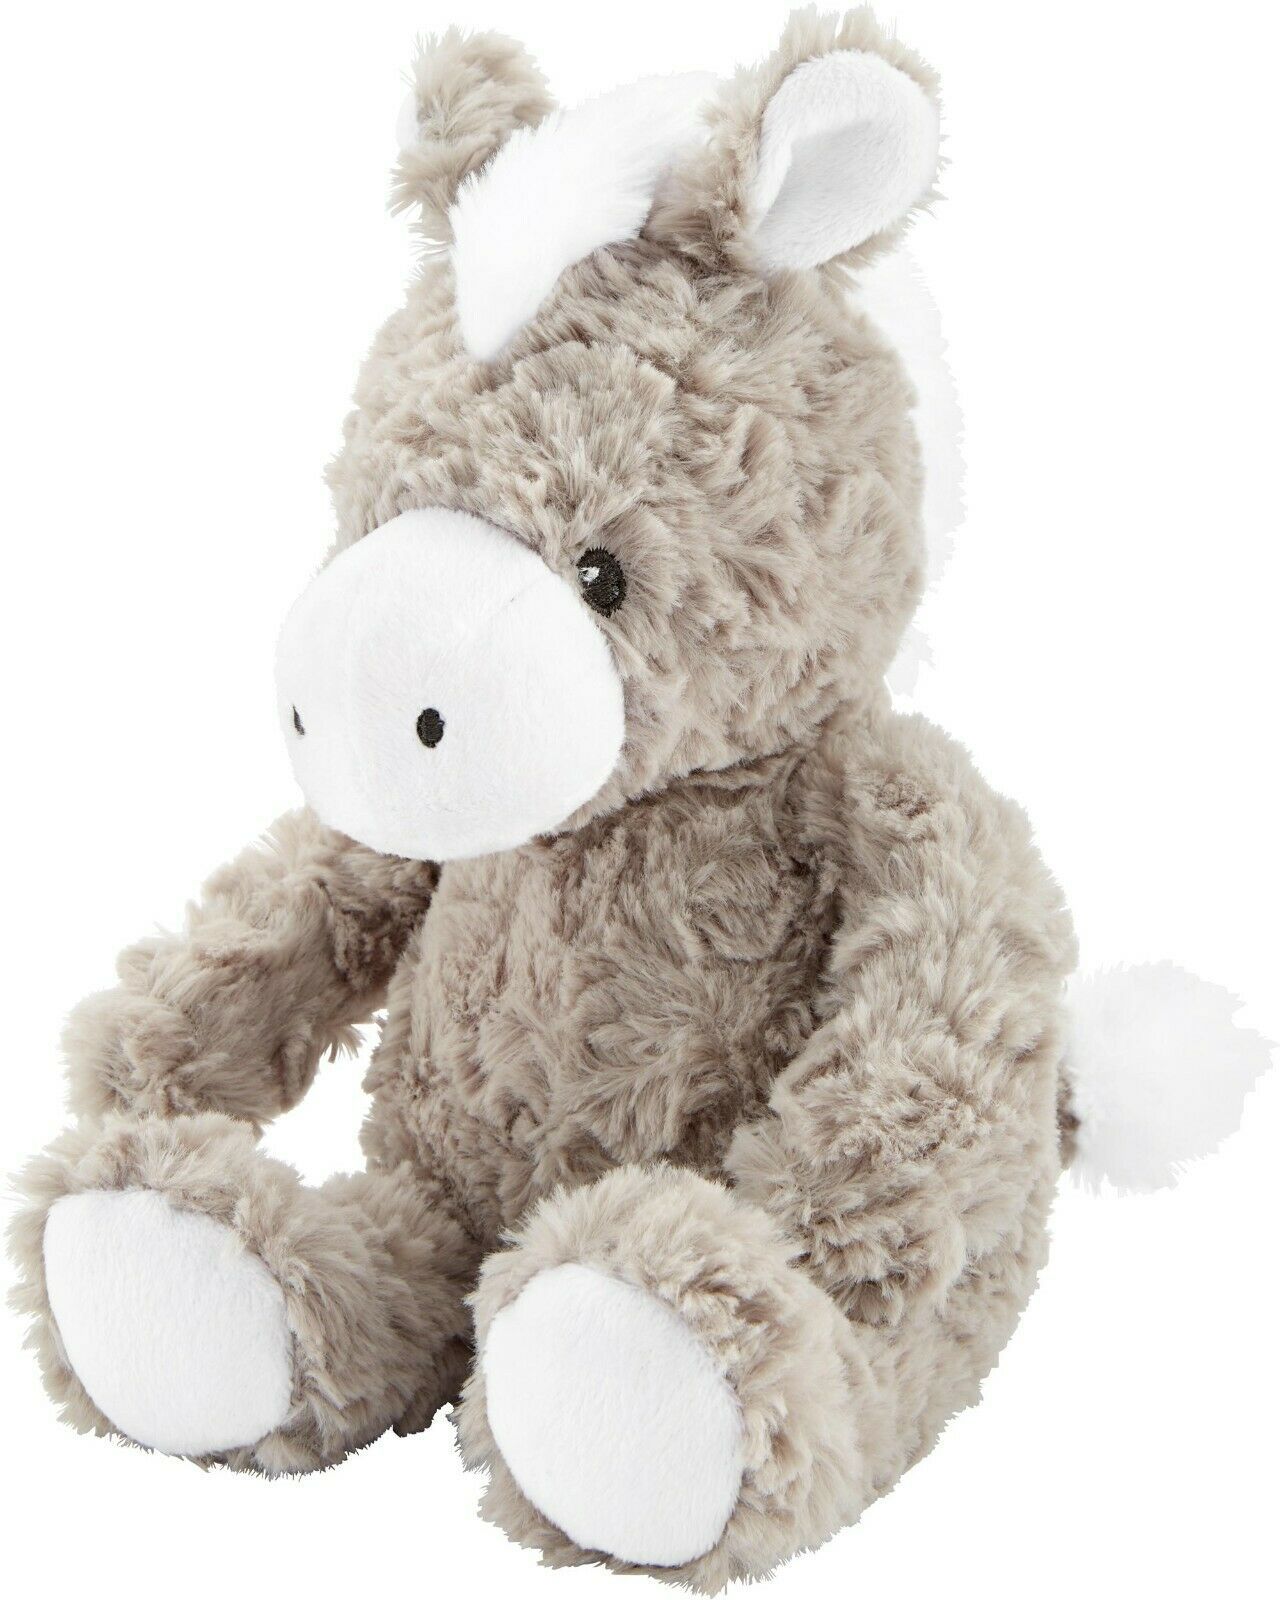 Primary image for NWT Carters Plush Toy Stuffed Animal Baby Donkey Horse Pony Taupe Gray White NEW